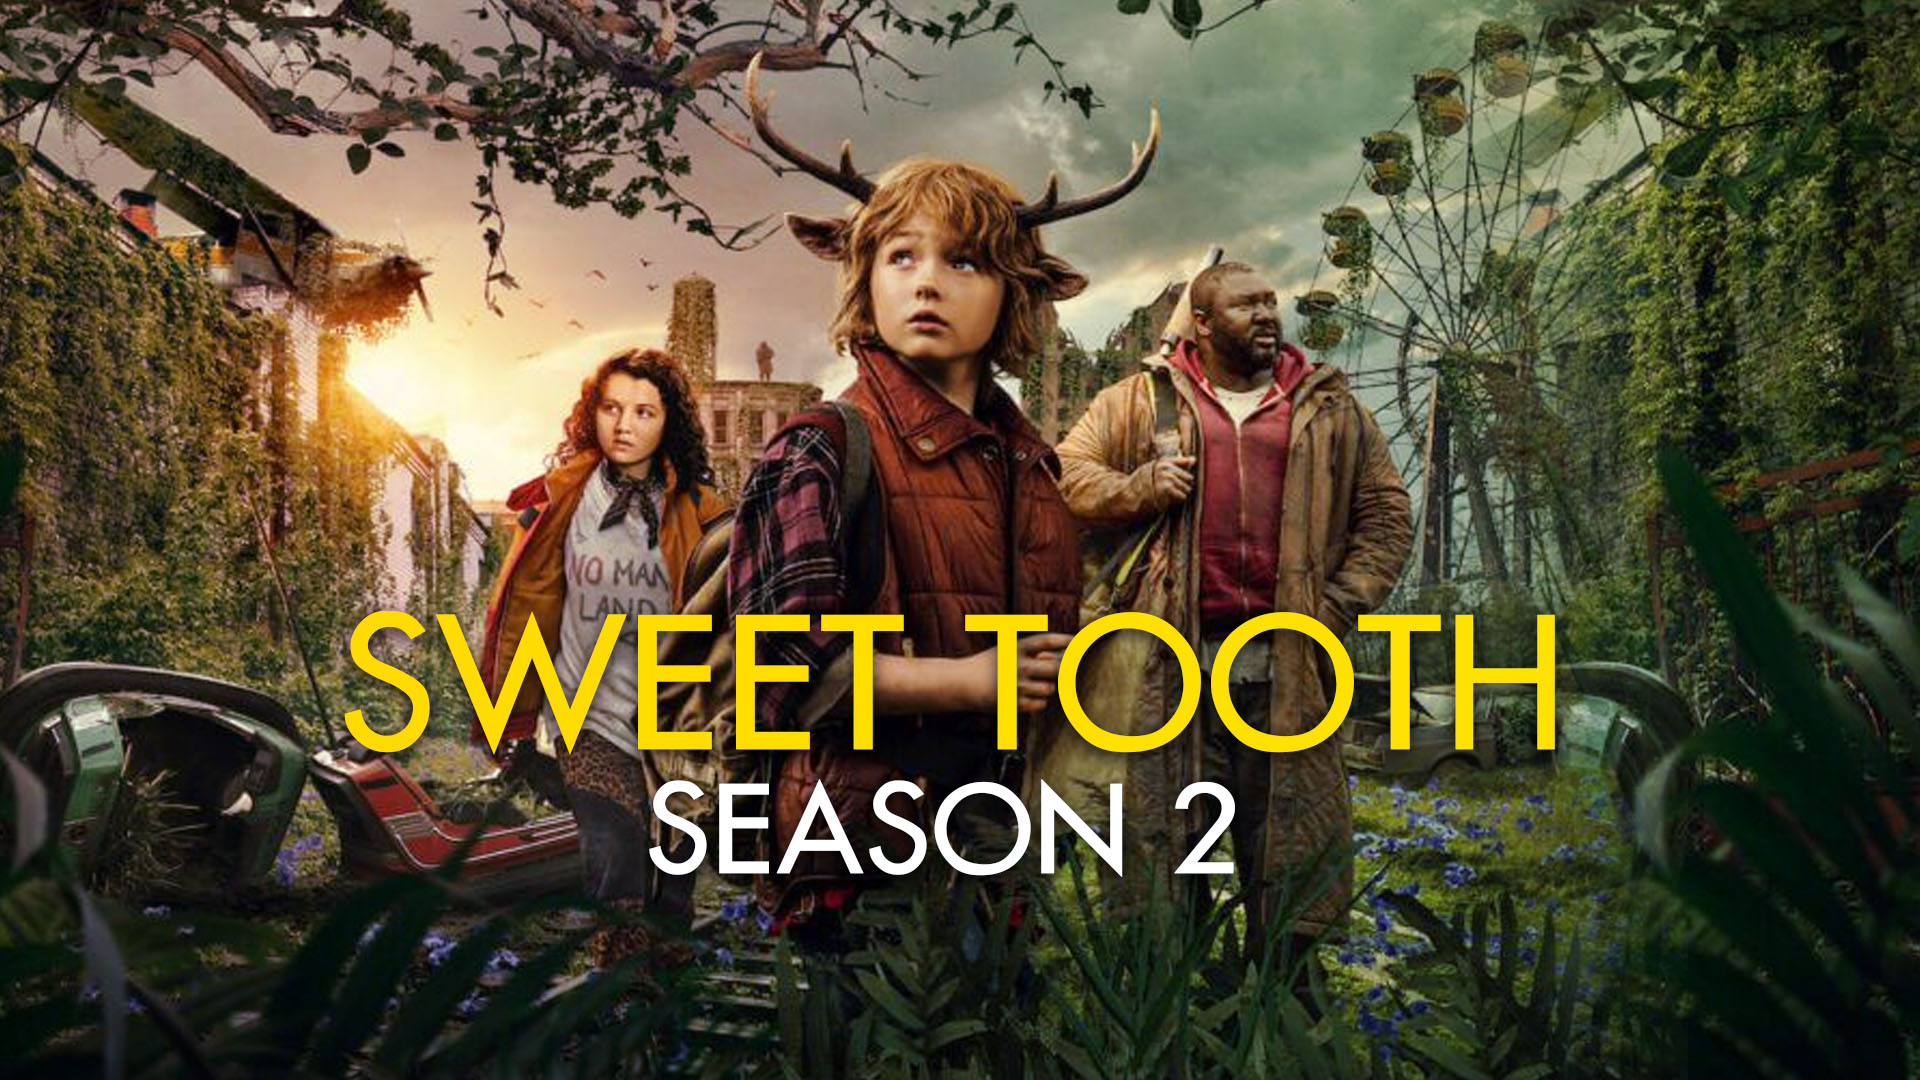 Sweet Tooth Season 2 Regarding The Release Date and Other Info!